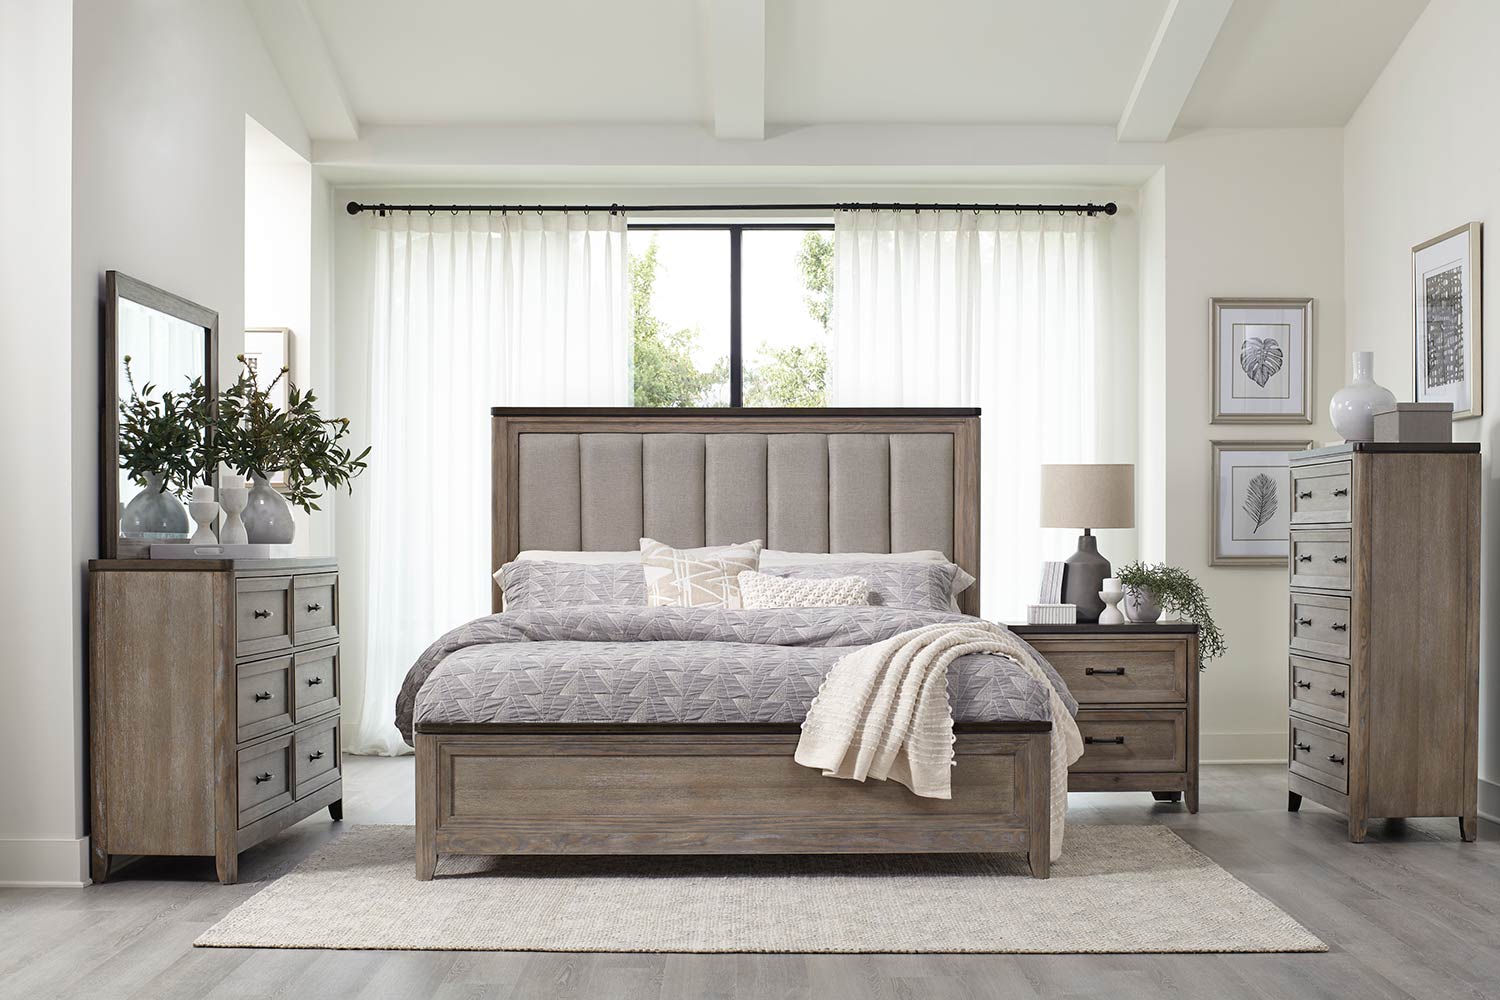 Homelegance Newell Bedroom Set - Two-tone finish: Brown and Gray